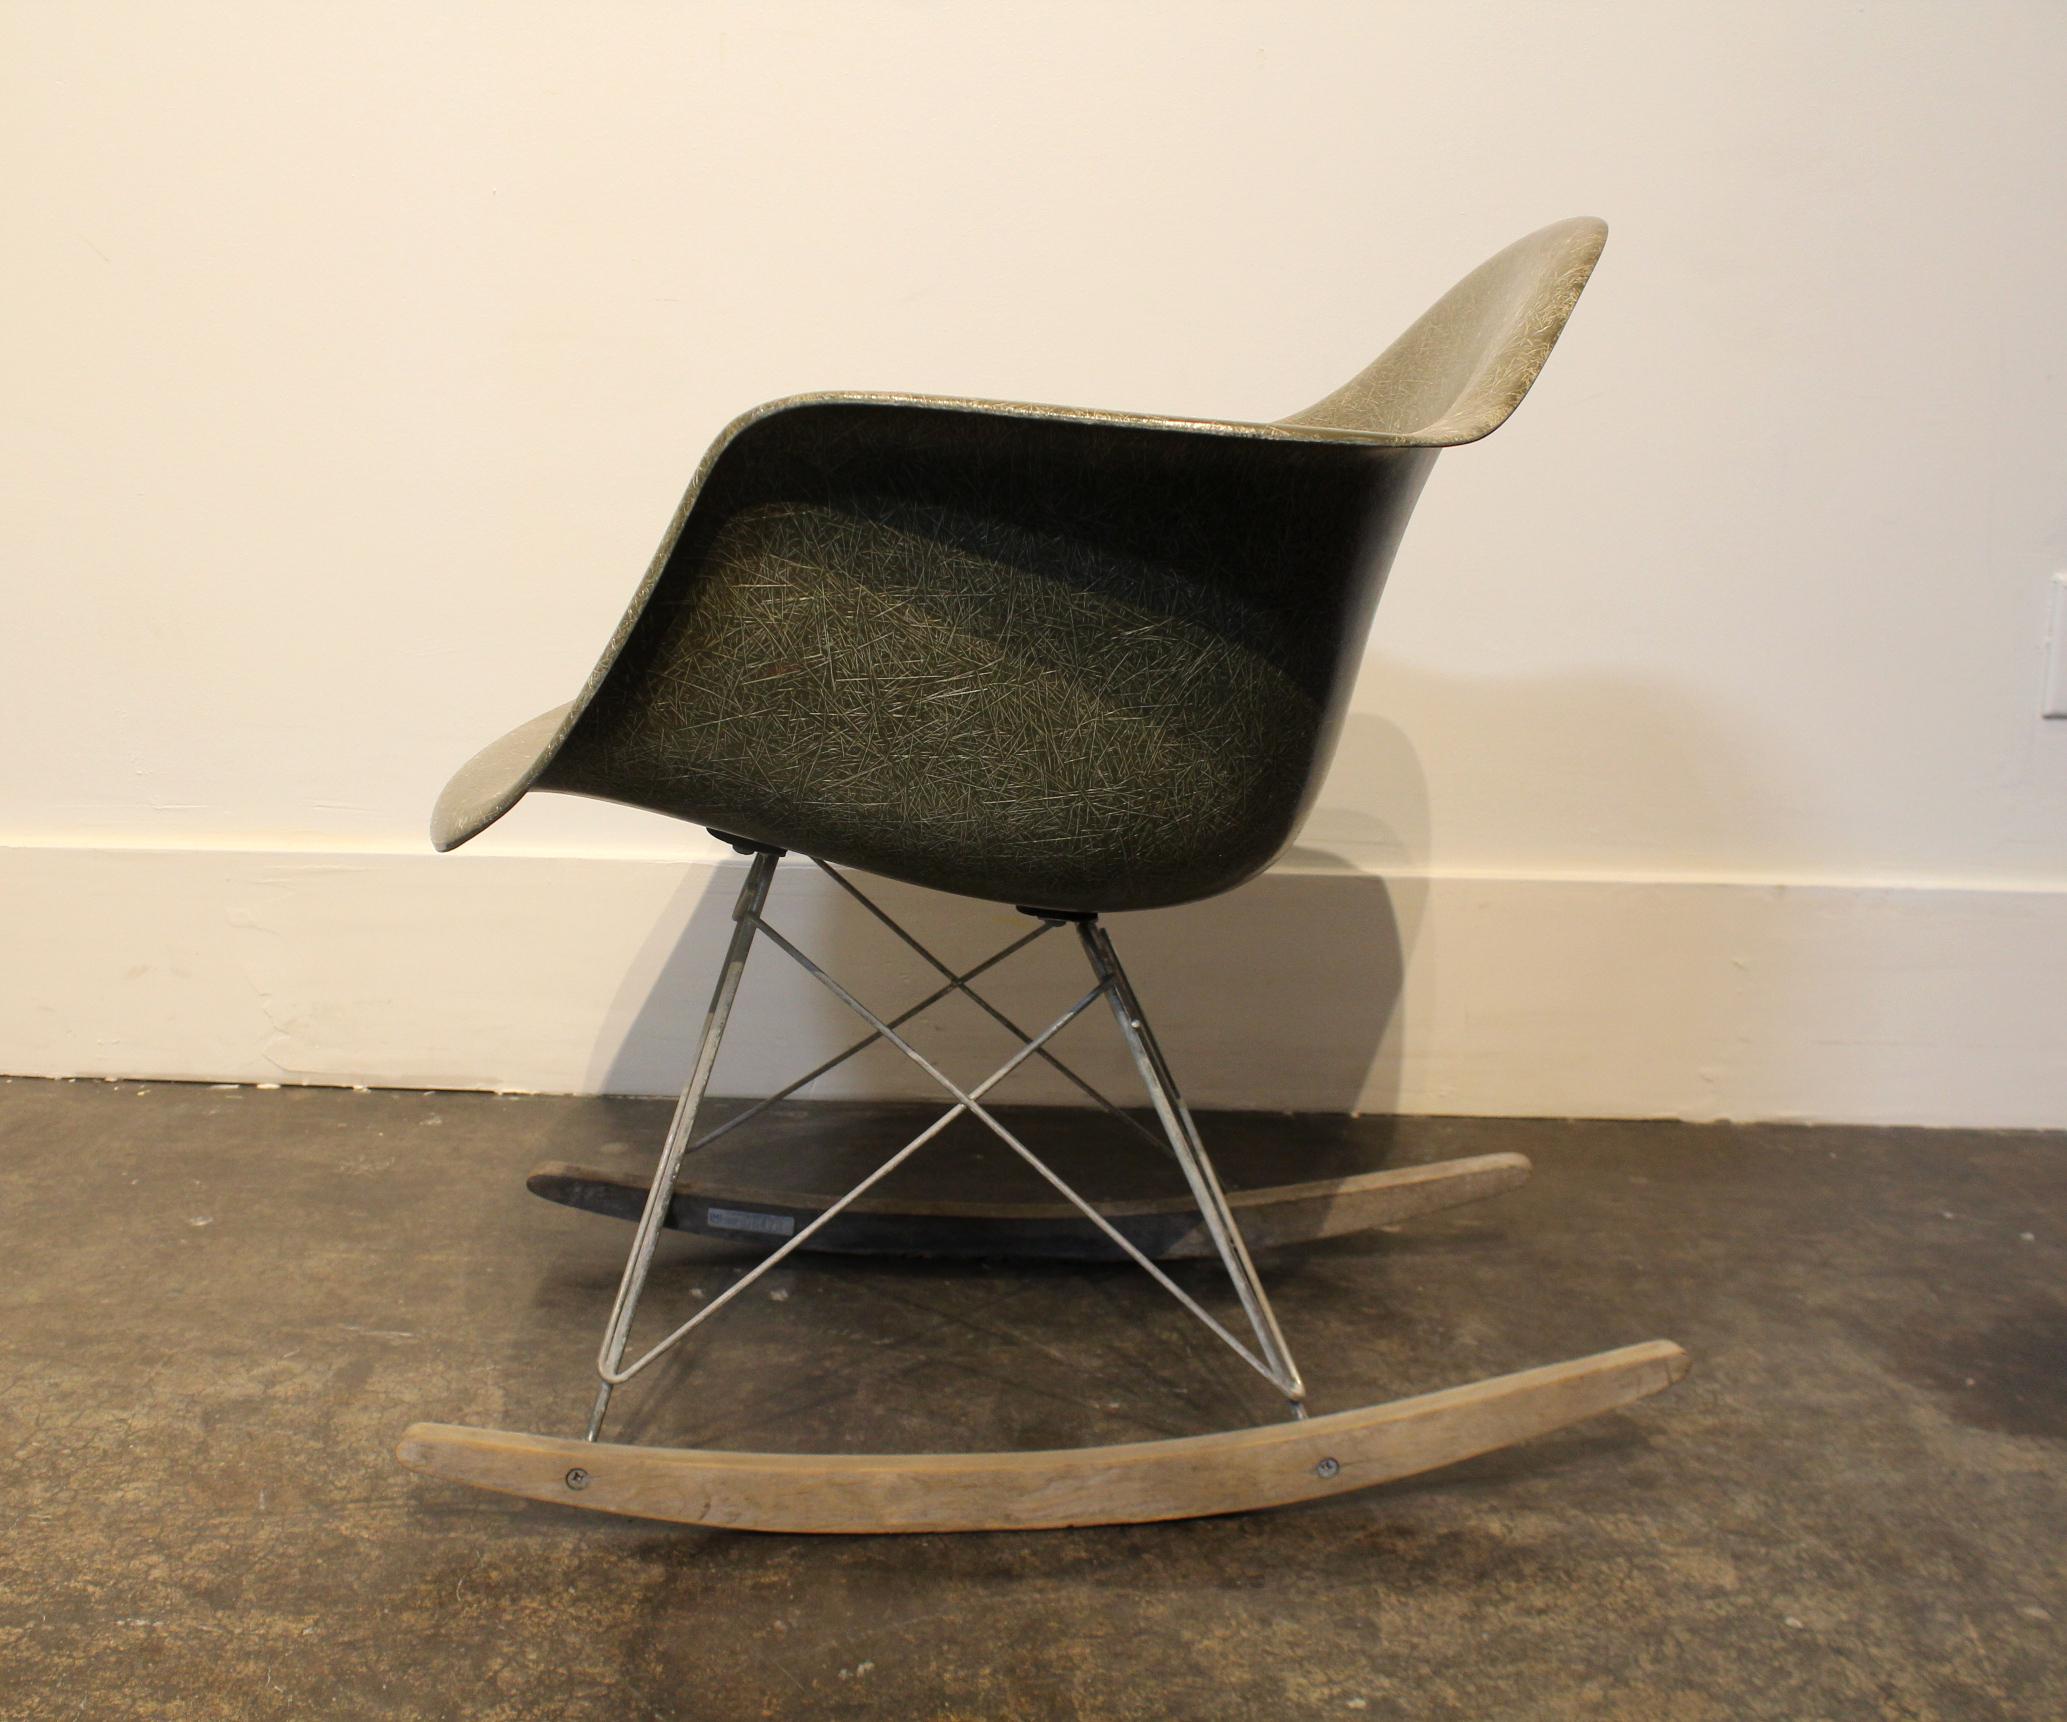 1950s Eames RAR rocker with original shell and legs. Has Herman Miller and Summit Plastics stamps on bottom. Shell has some scratches to headrest and arms but is in good condition. Legs are in fair condition, metal shows signs of oxidation and rust,